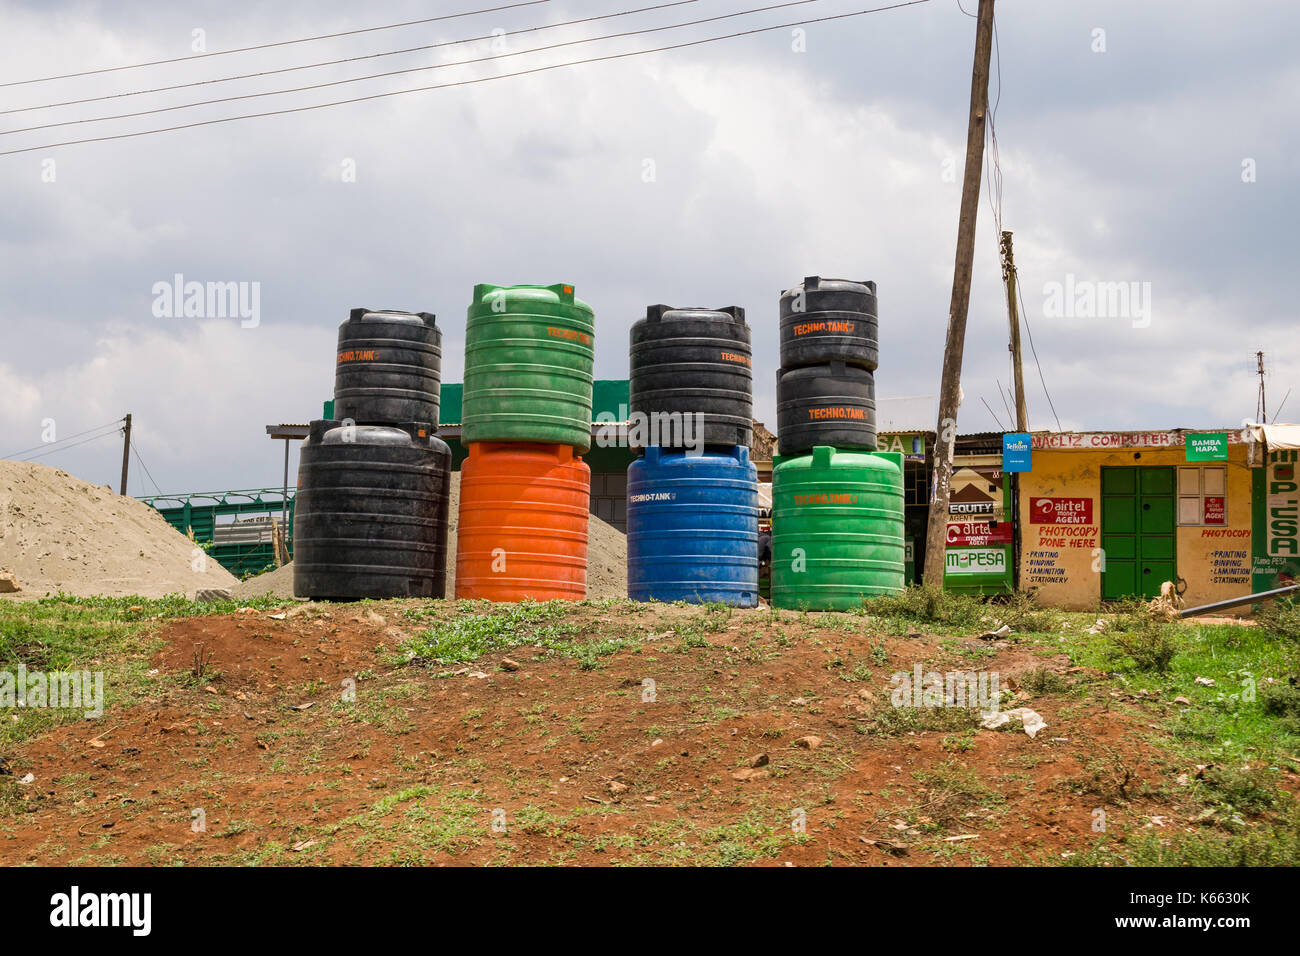 Large plastic water storage containers on display by roadside, Kenya Stock Photo